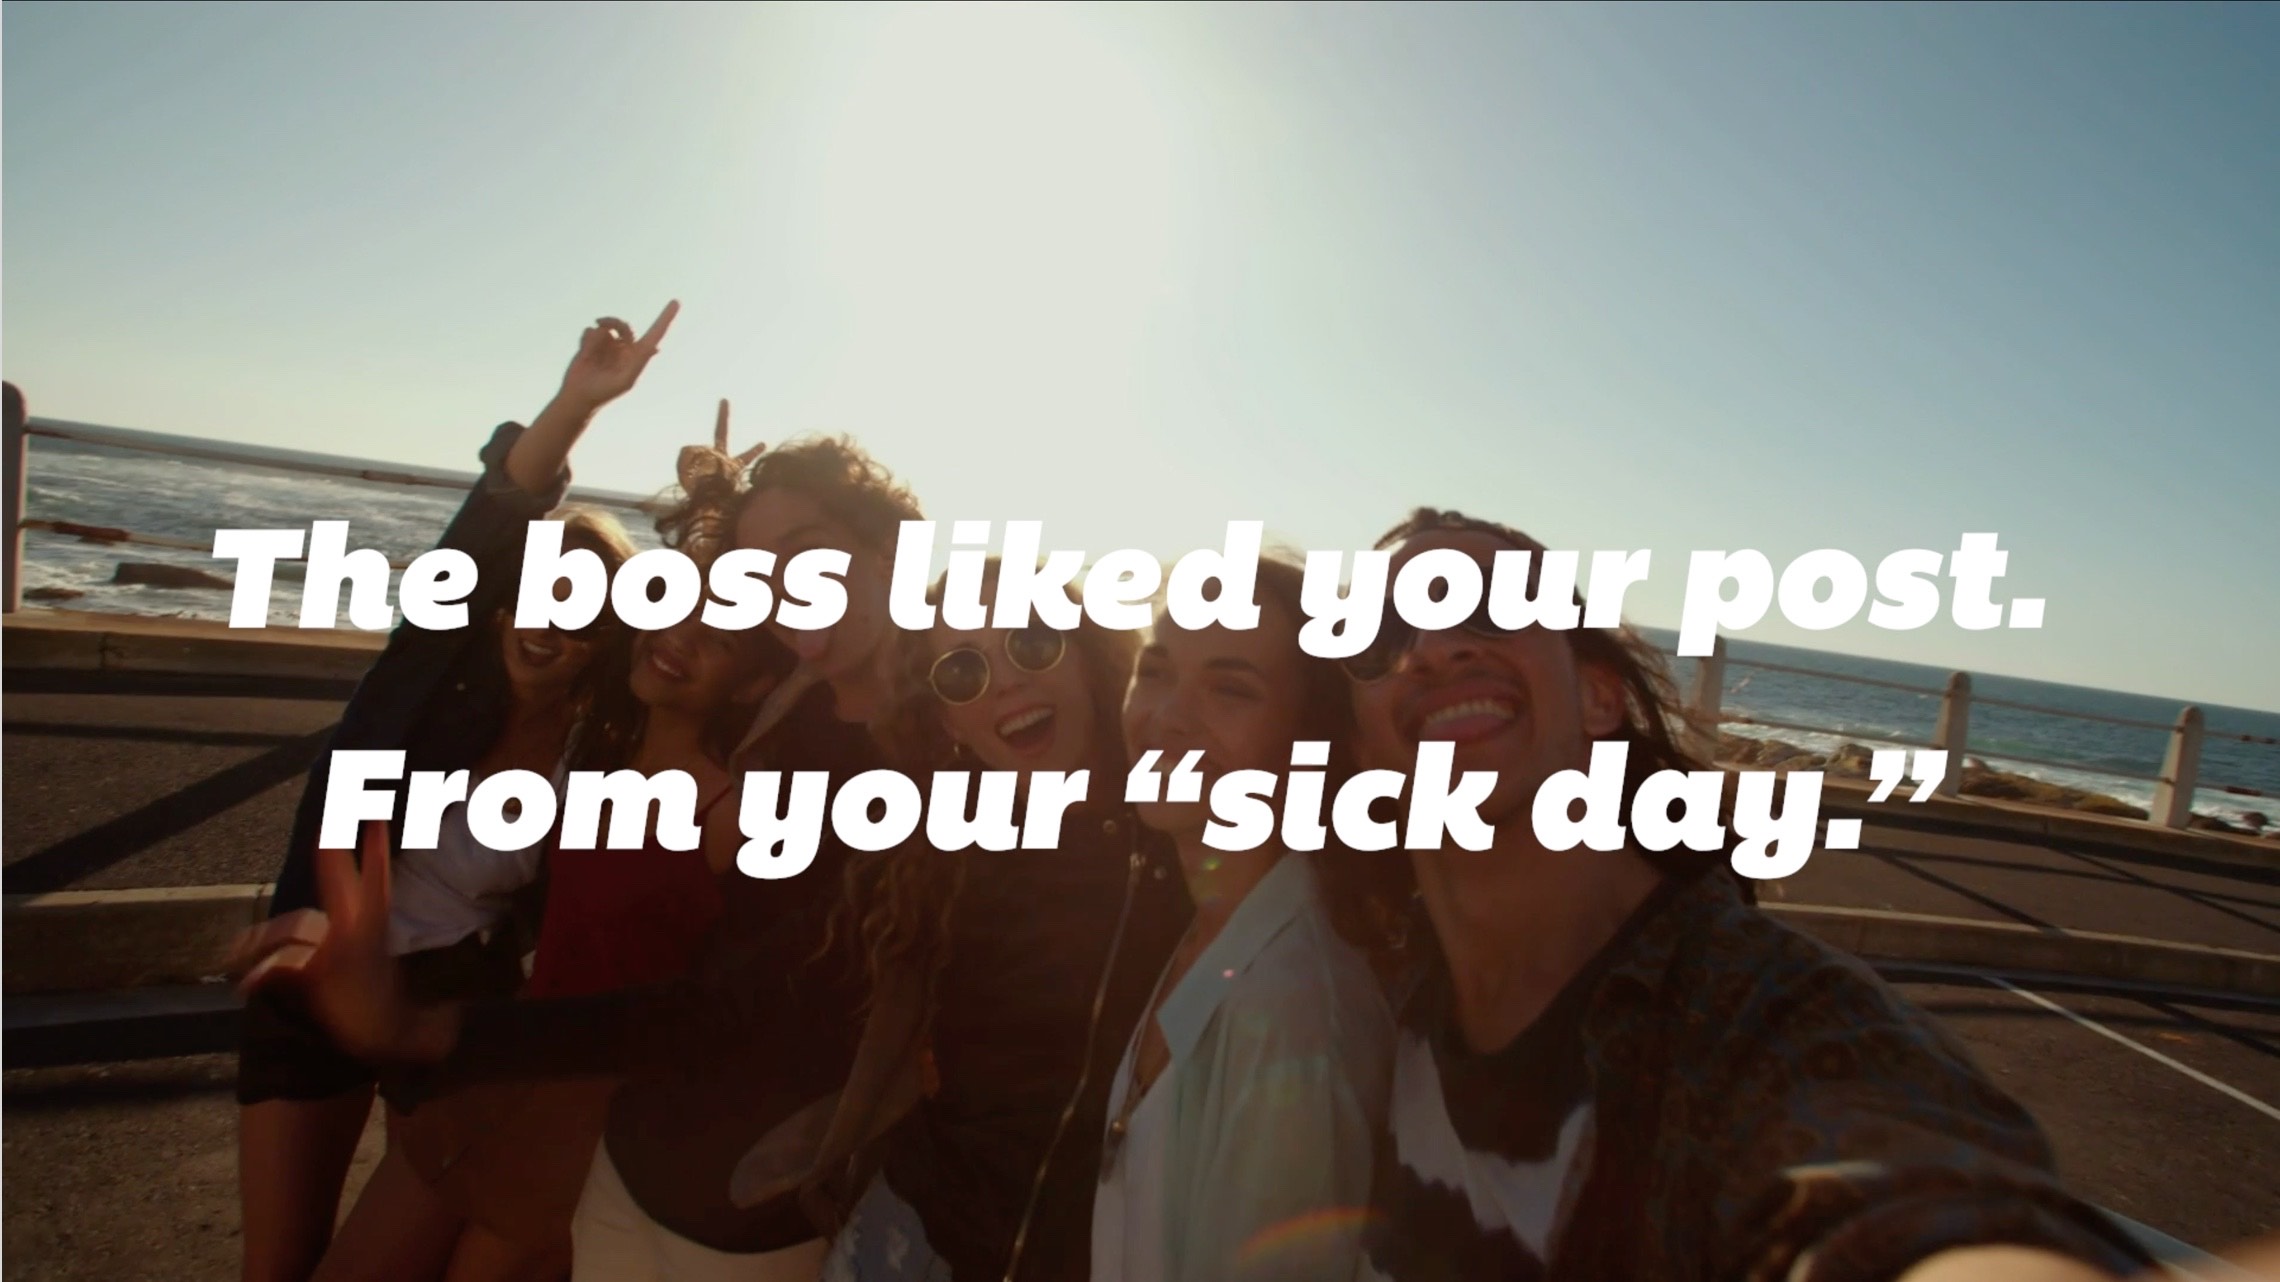 Click to watch the "sick day" video.